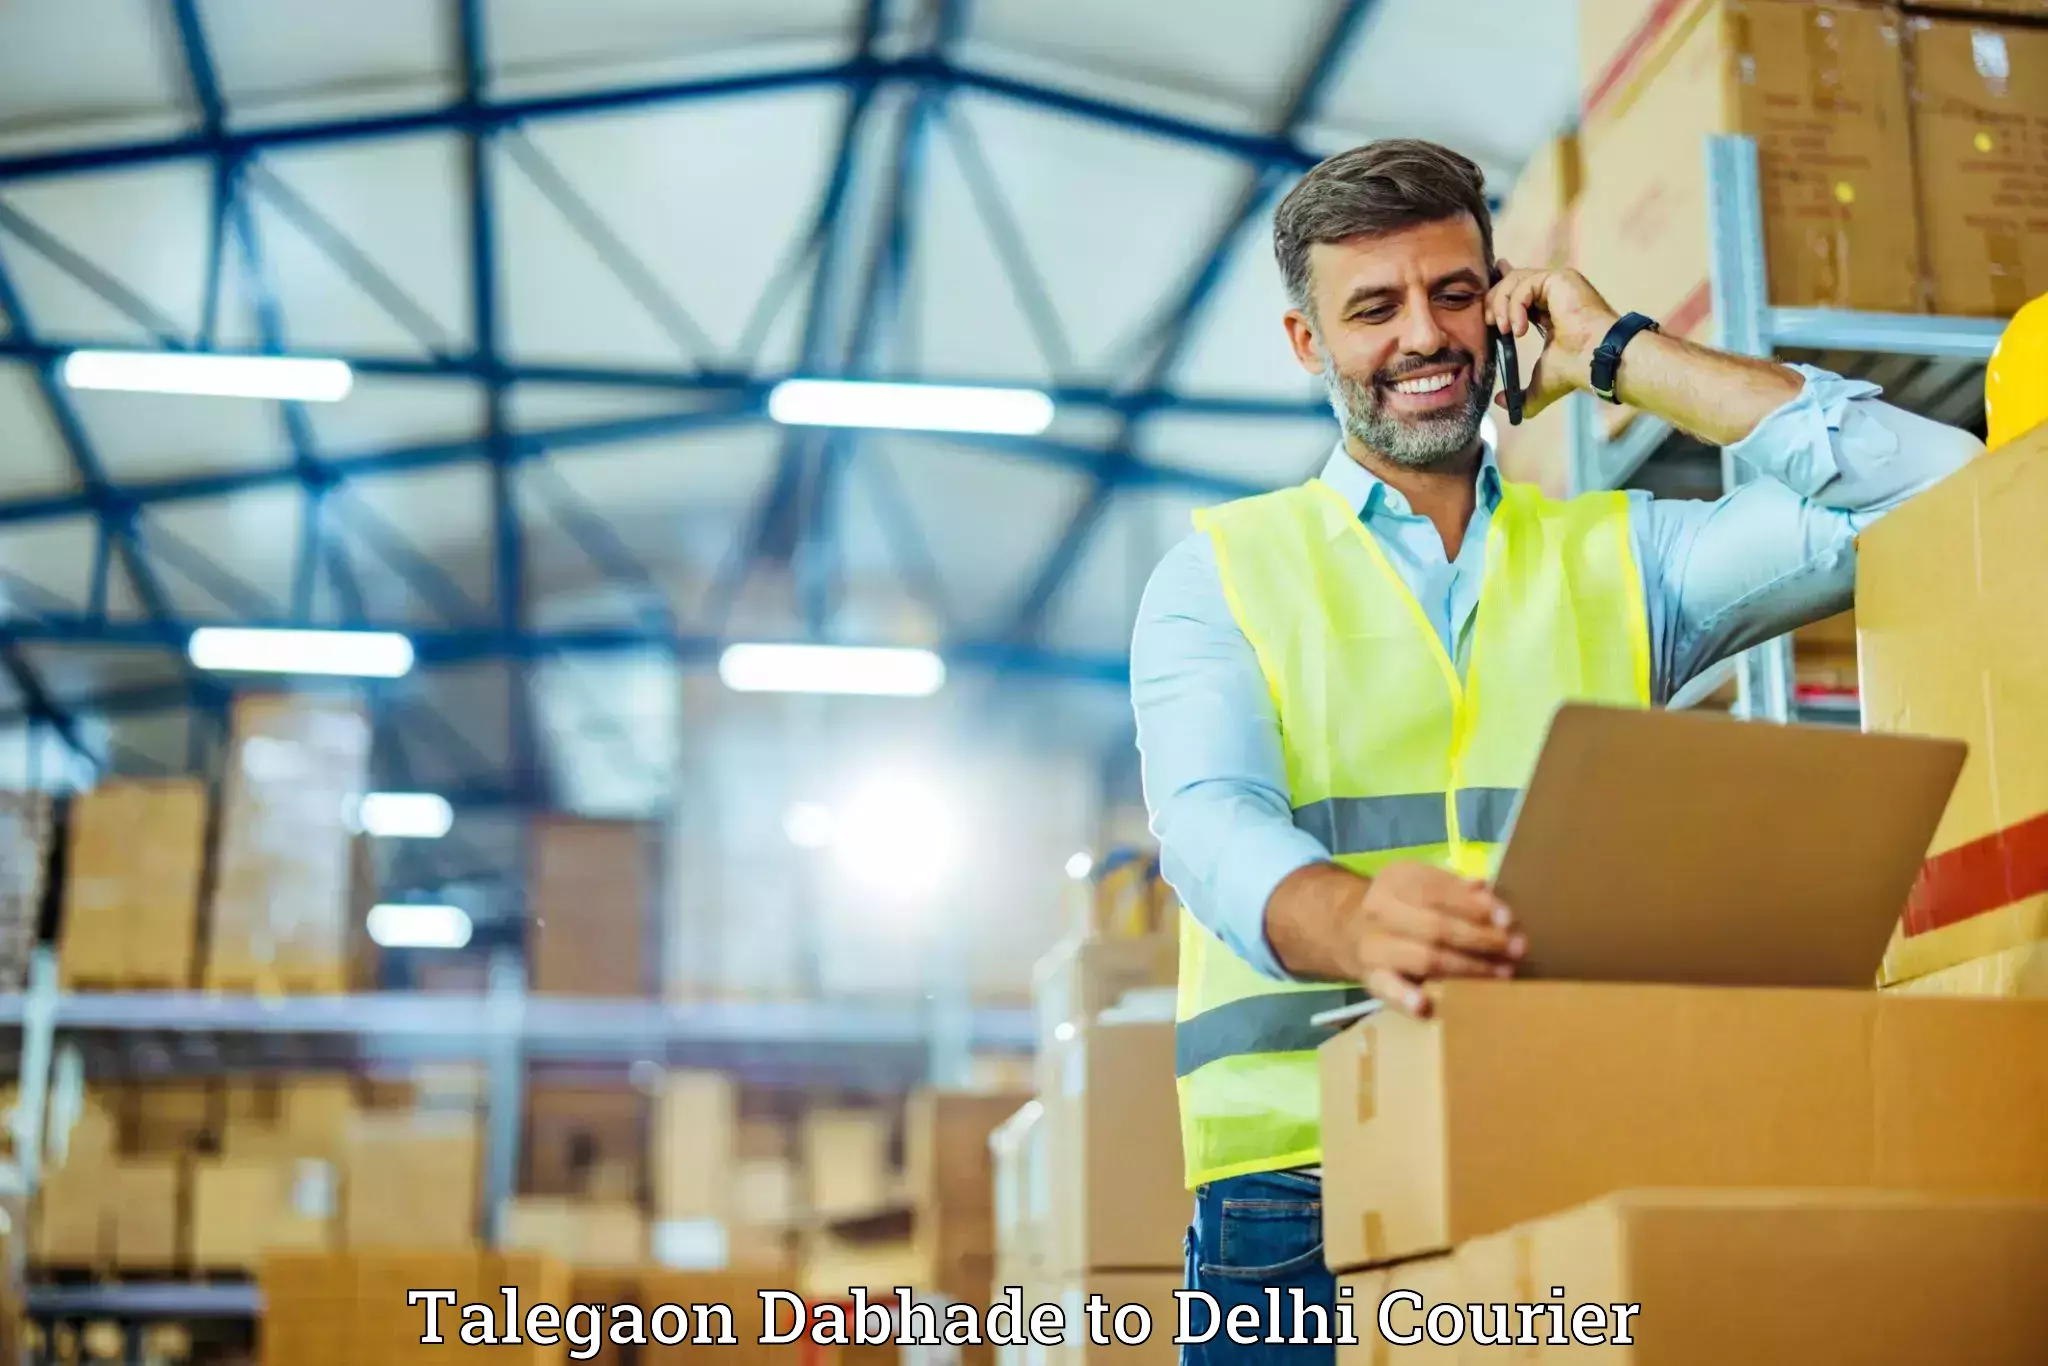 Baggage transport management Talegaon Dabhade to NCR